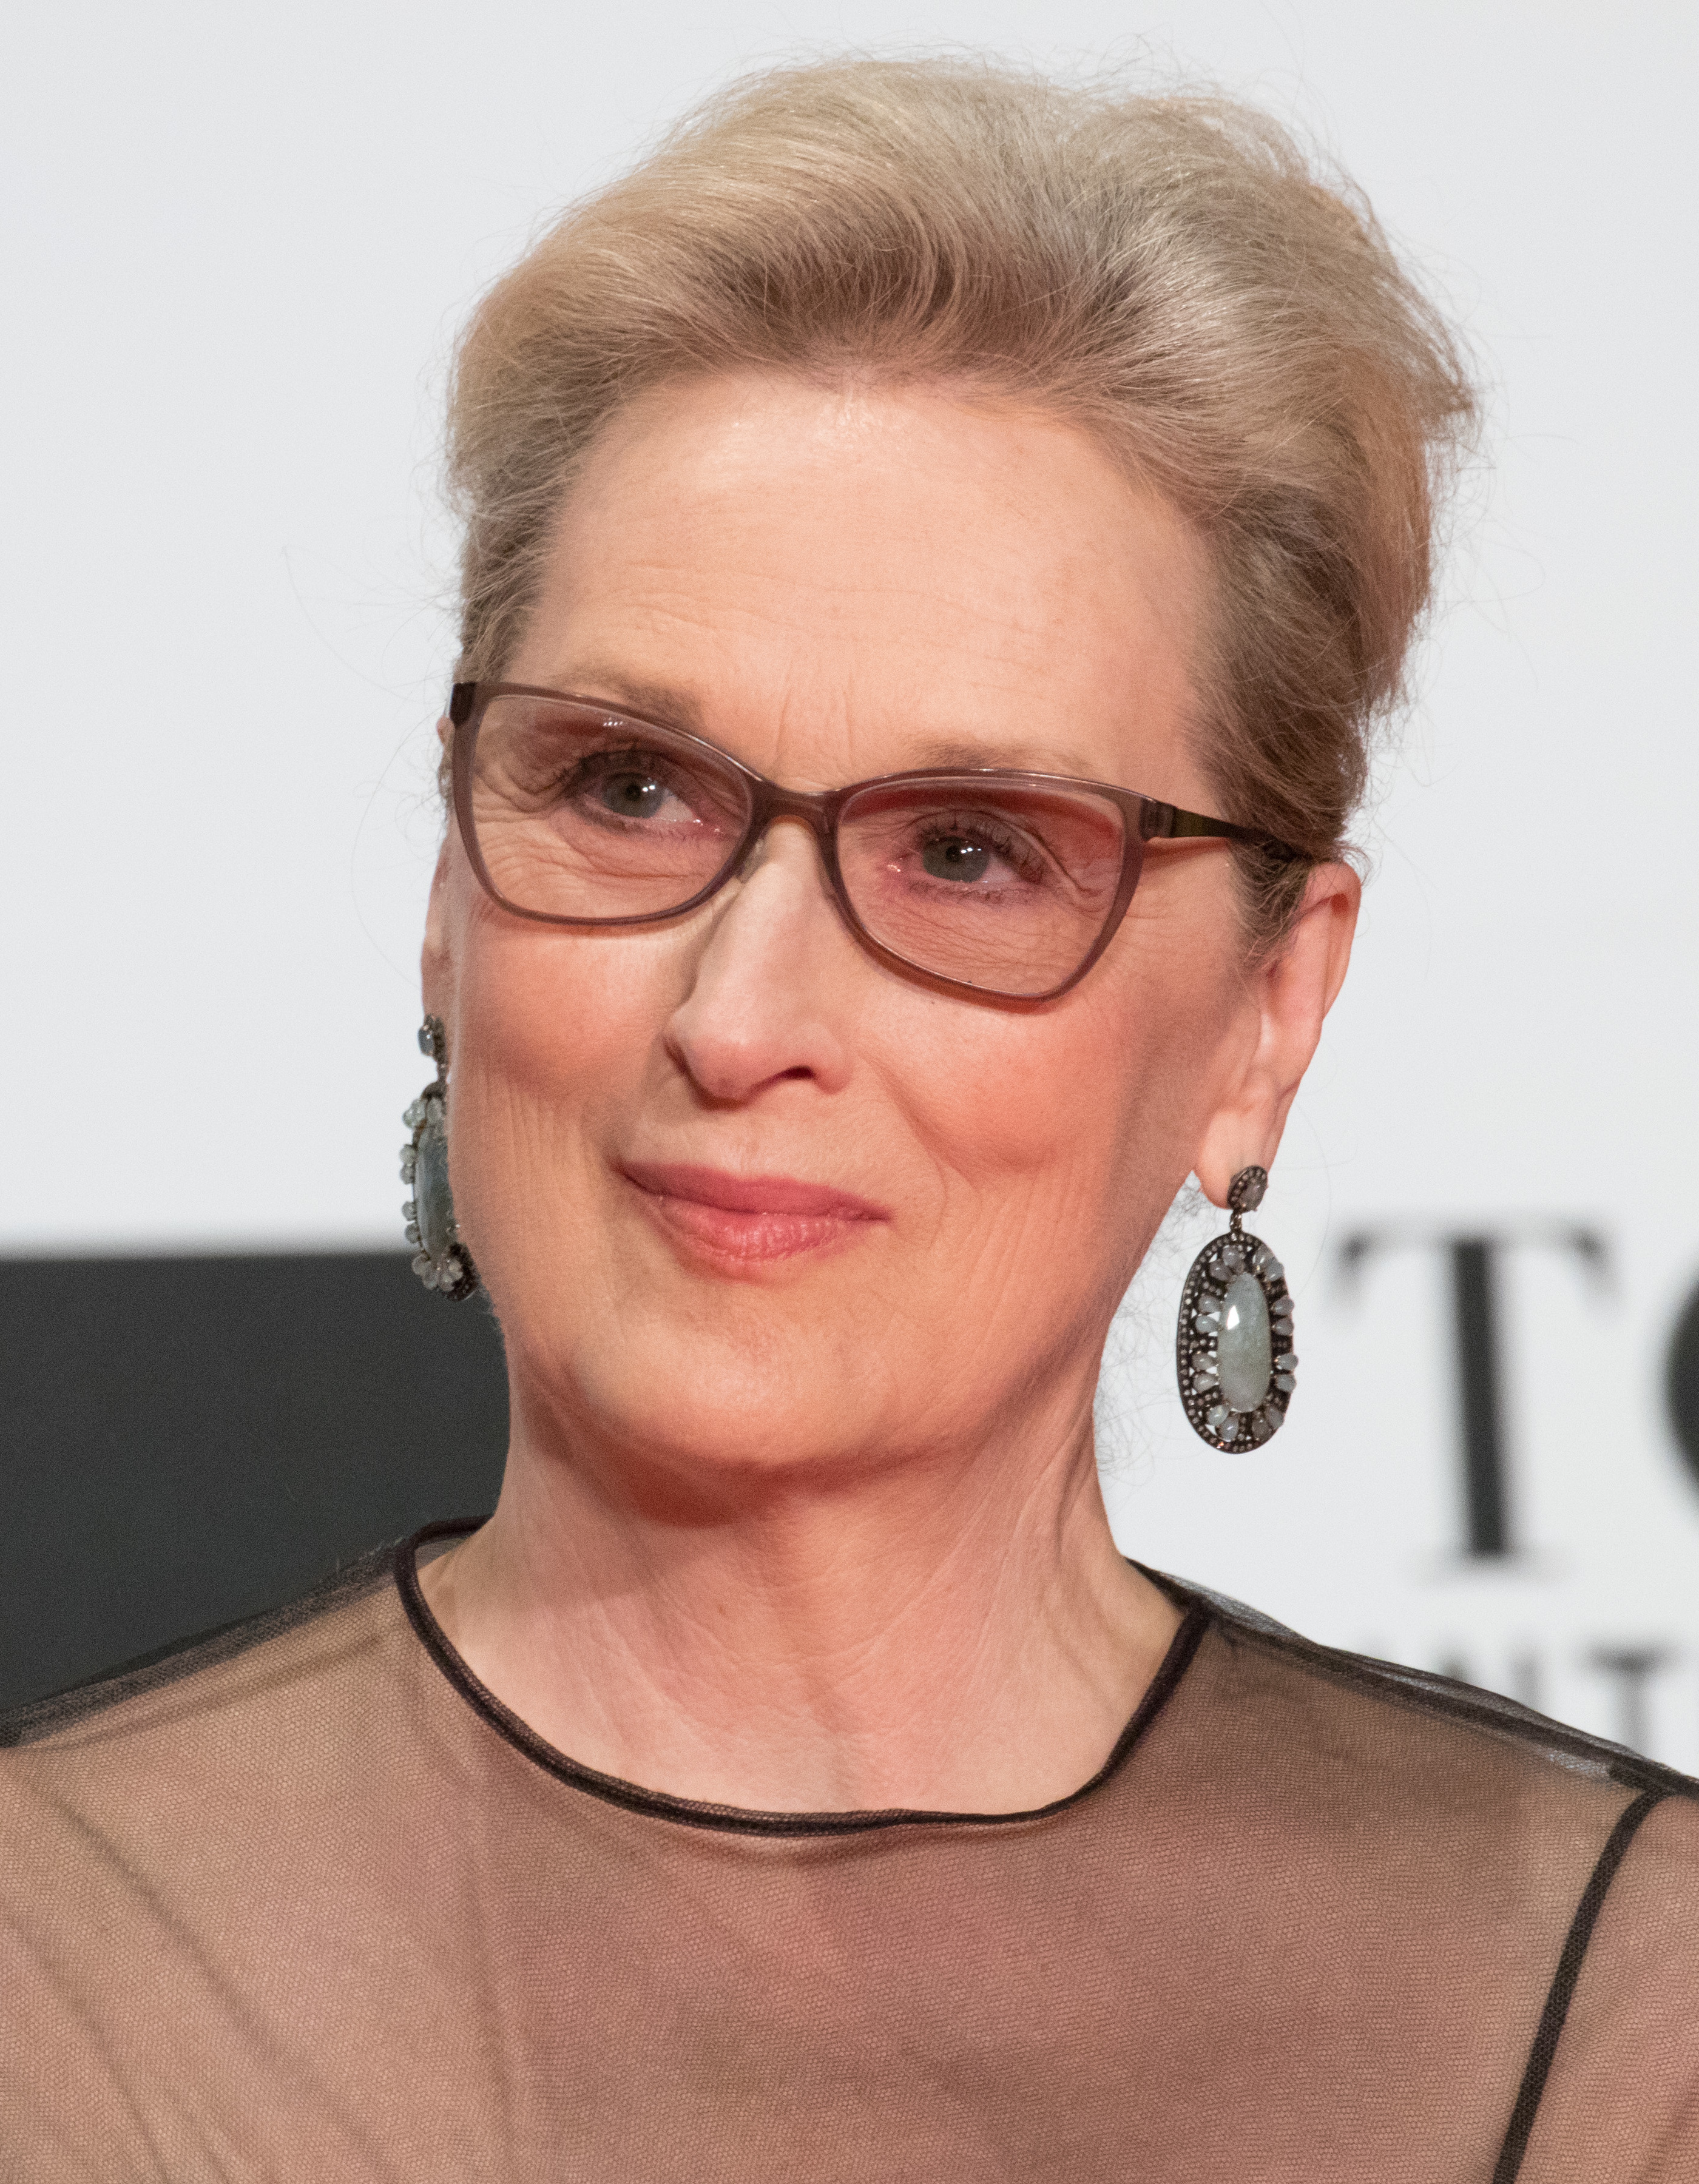 List Of Awards And Nominations Received By Meryl Streep Wikipedia